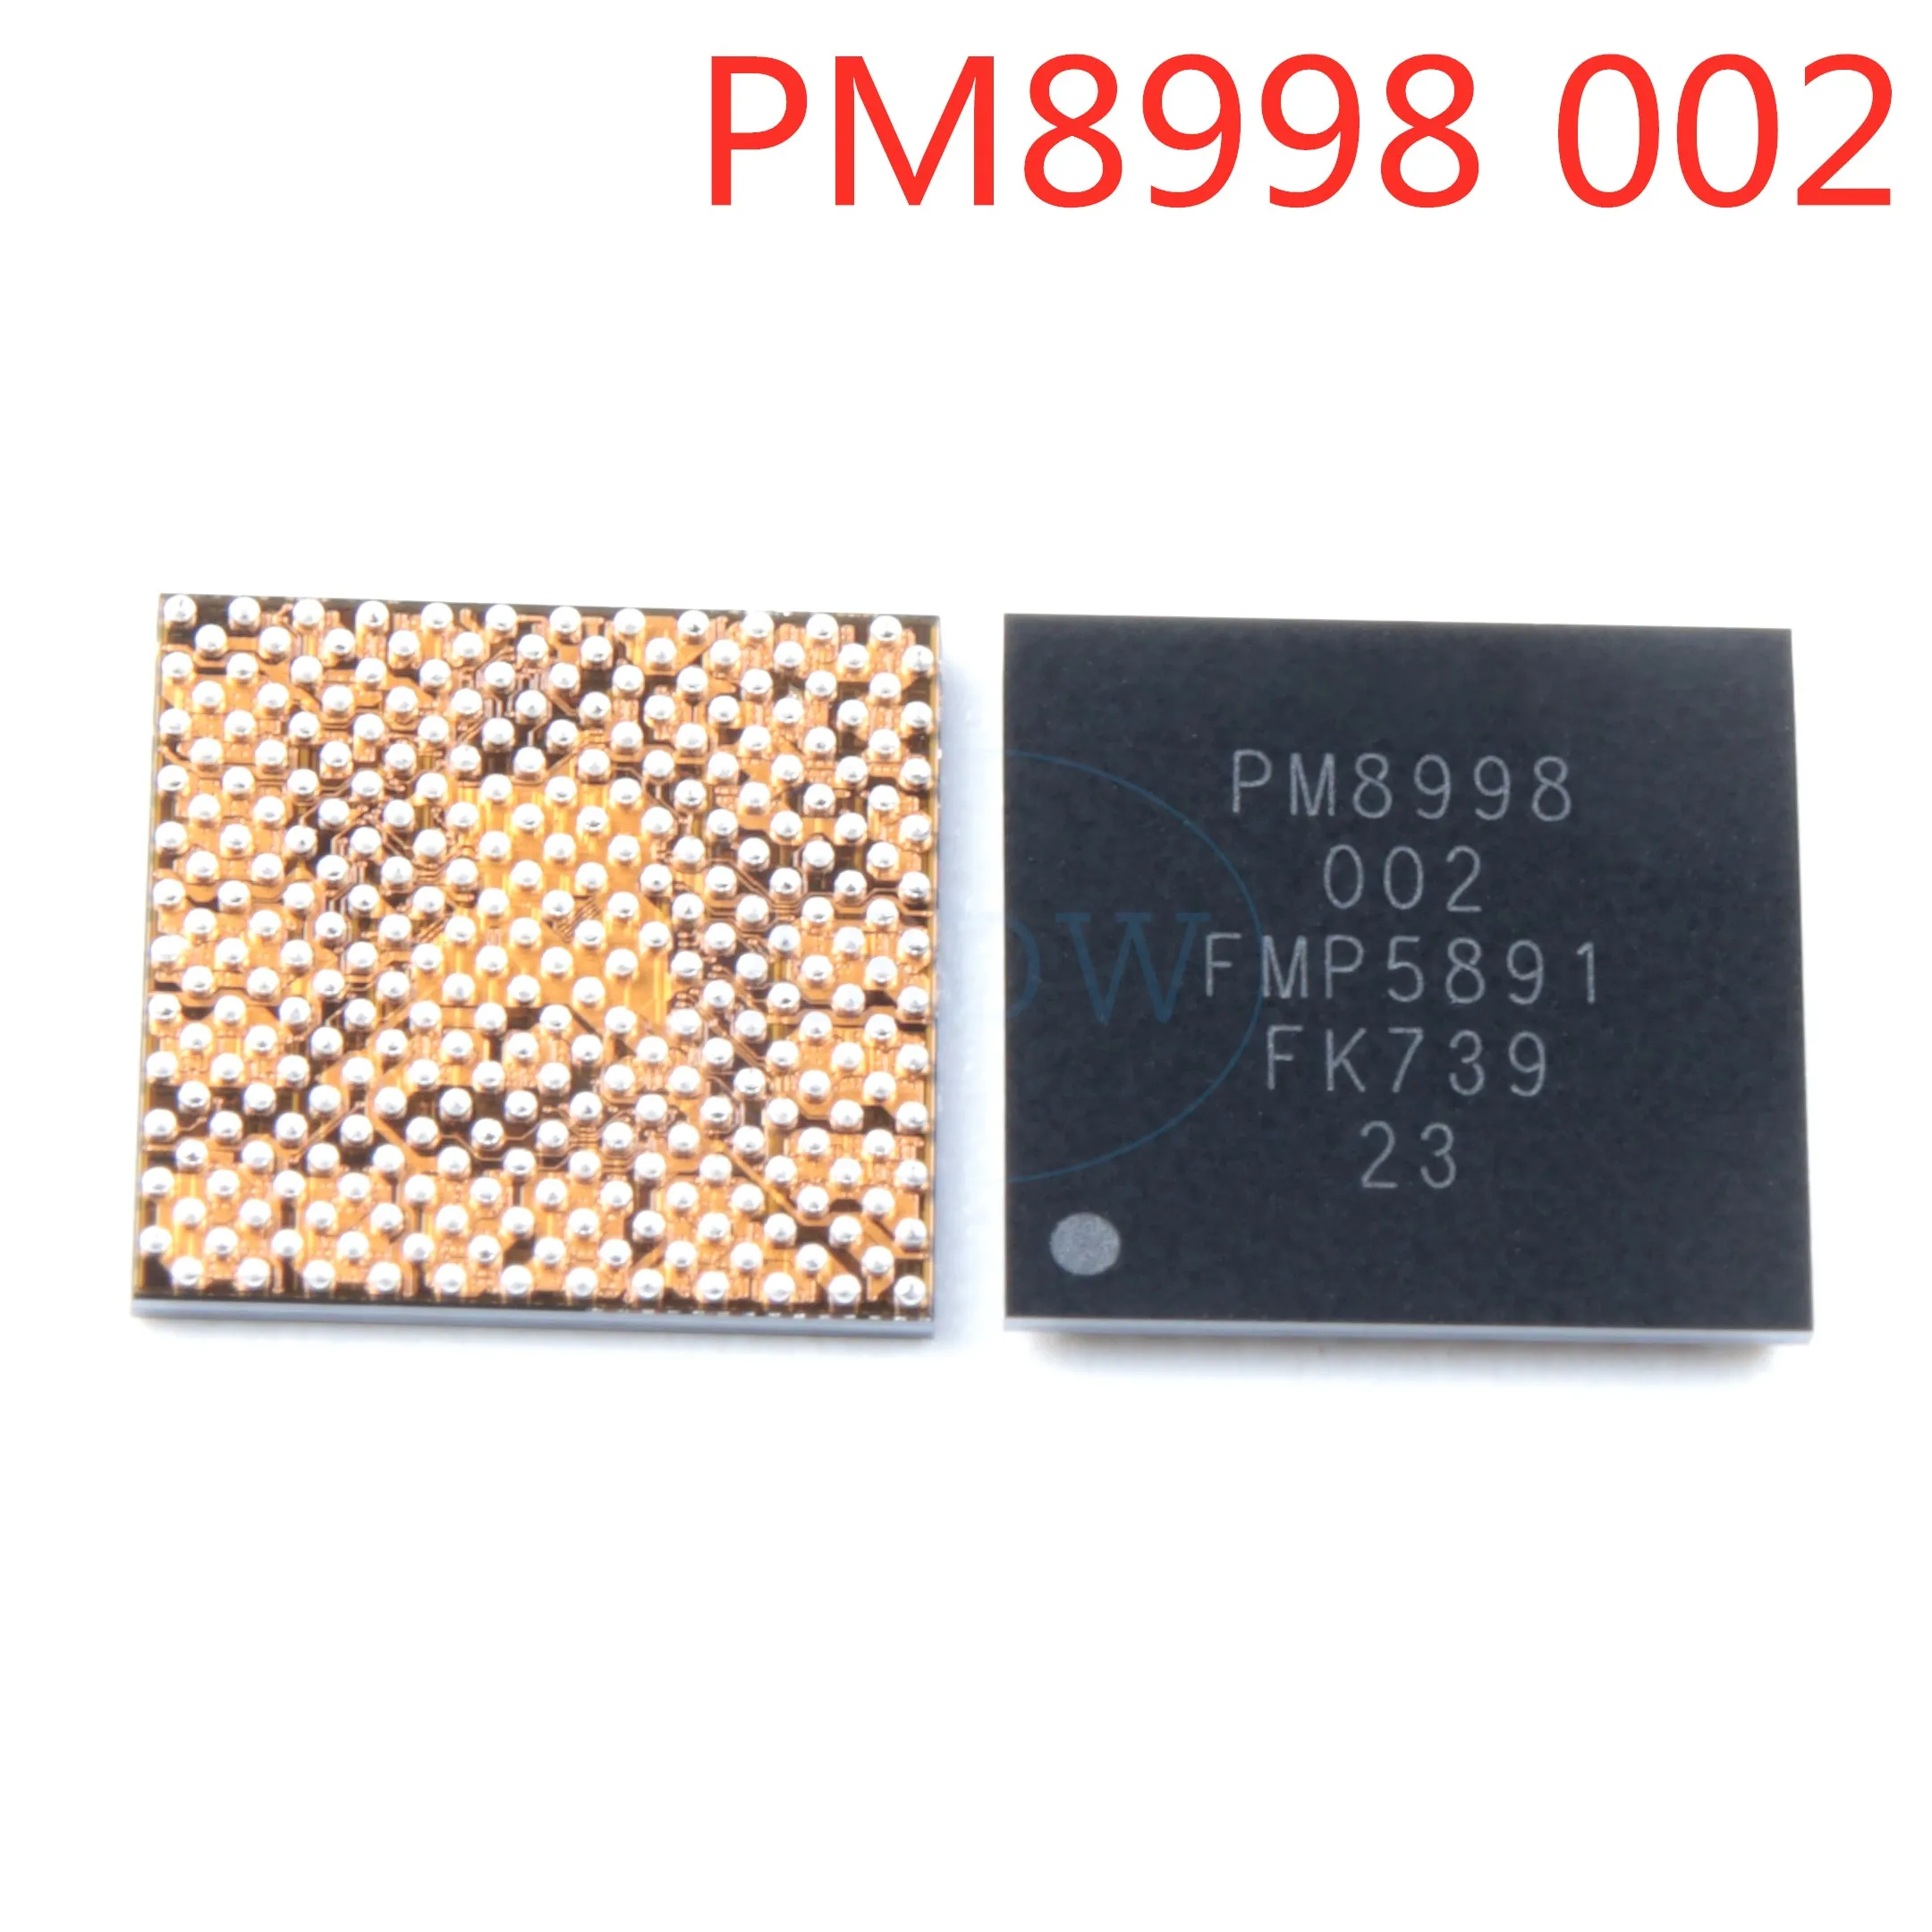 

10Pcs/Lot New PM8998 002 PM8998 For Samsung Galaxy S8 G9500 Main Power Management Control Power Supply IC